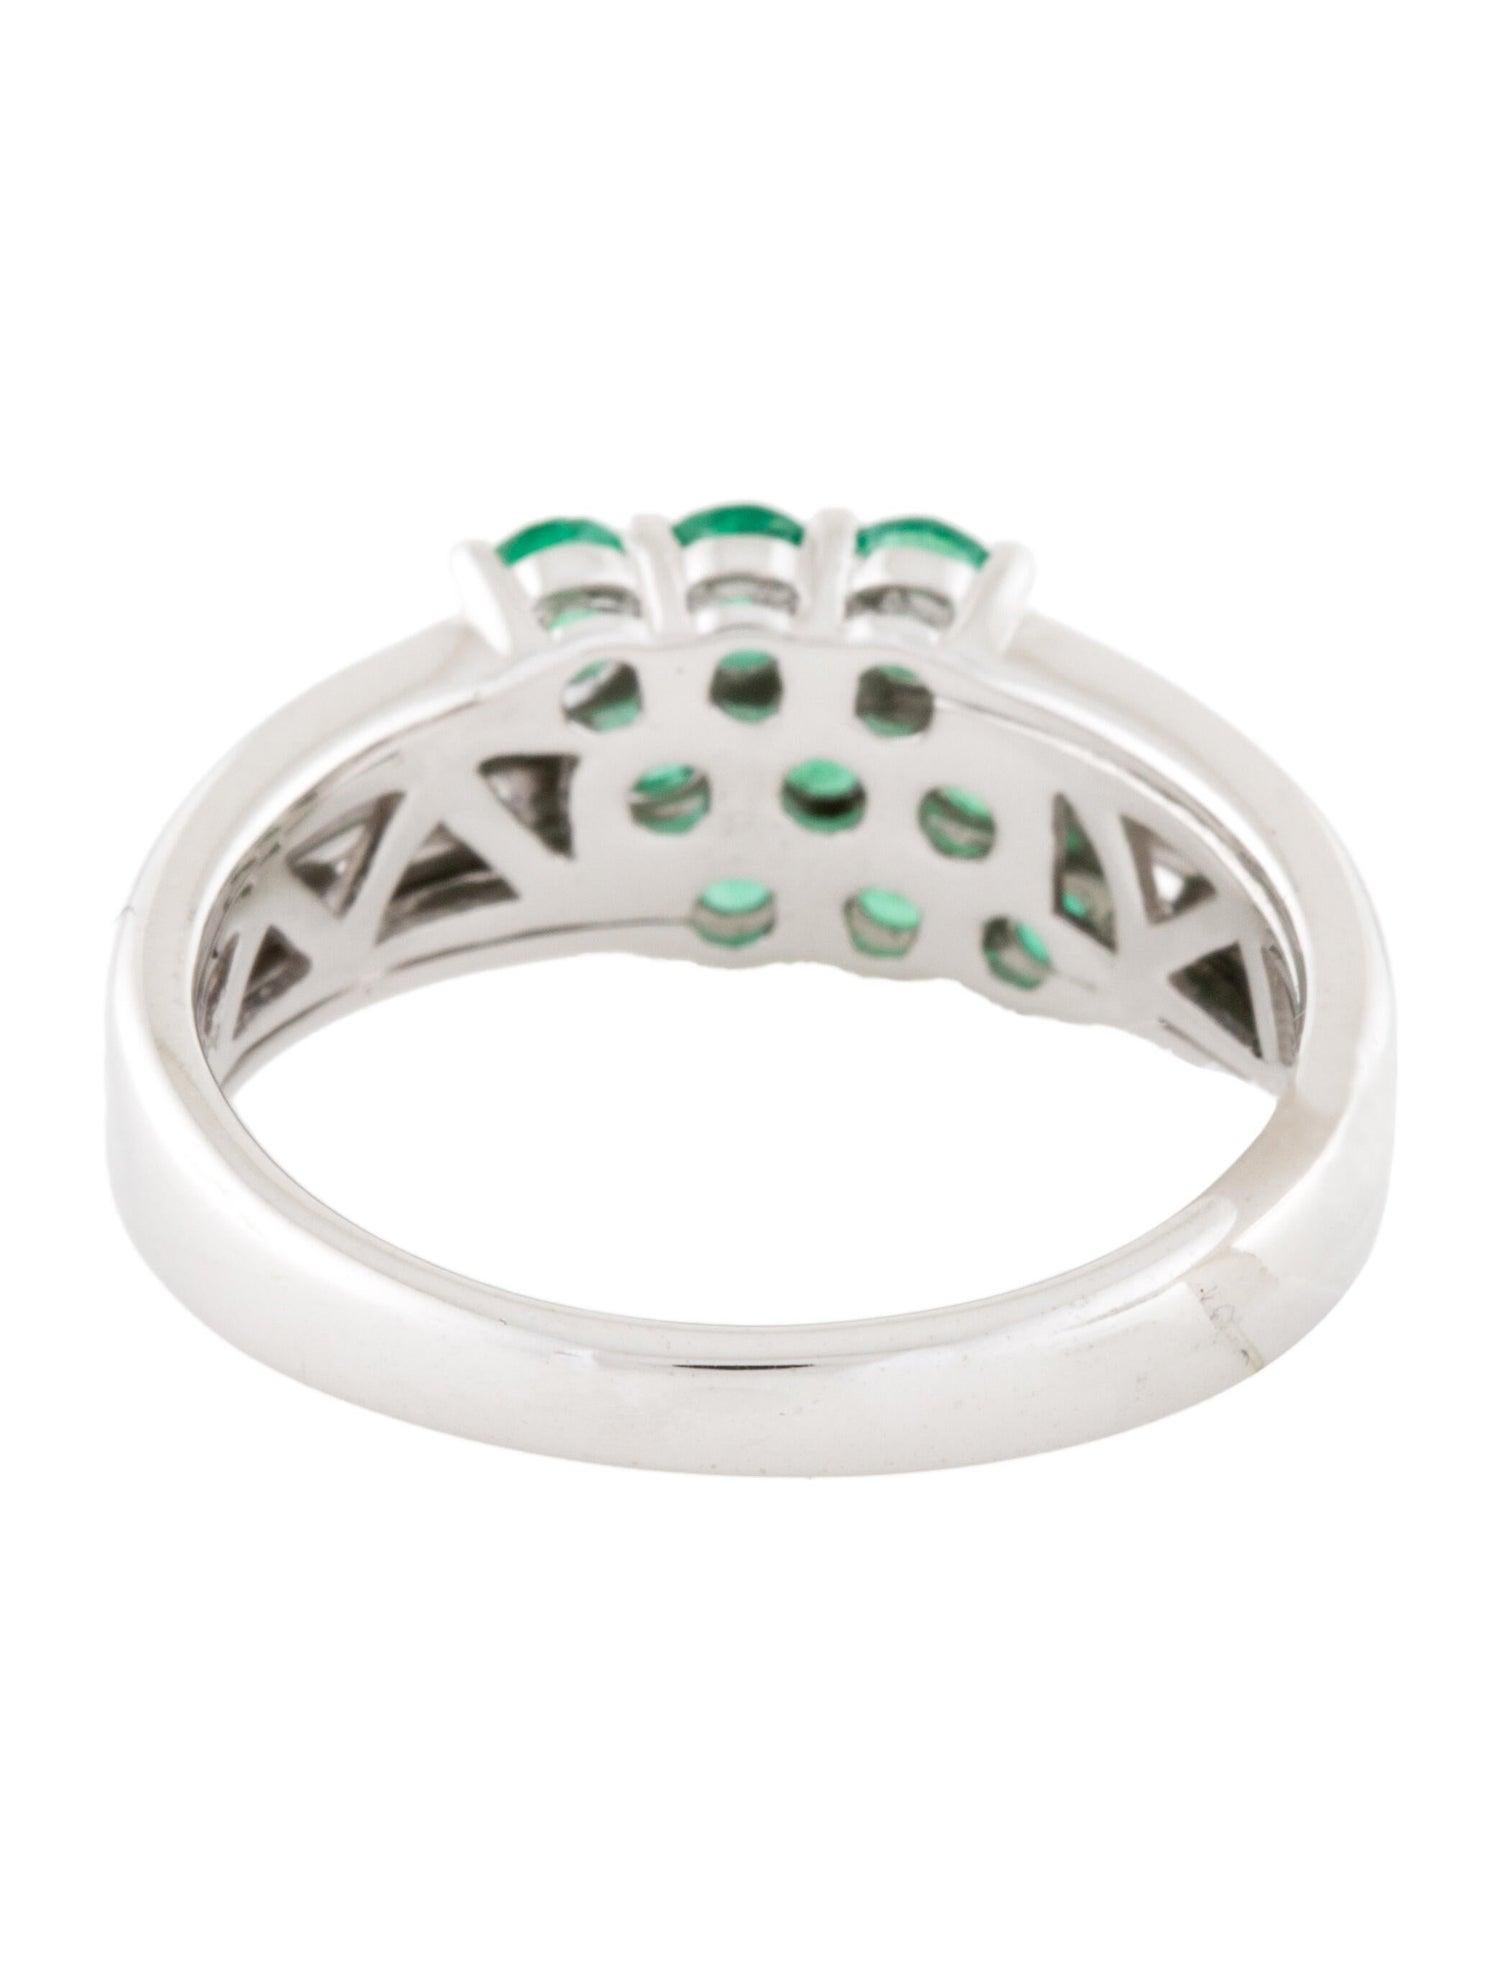 Brilliant Cut 14K Emerald Band 1.00ctw, Size 7.5 - Timeless Elegance & Luxury Statement Piece For Sale